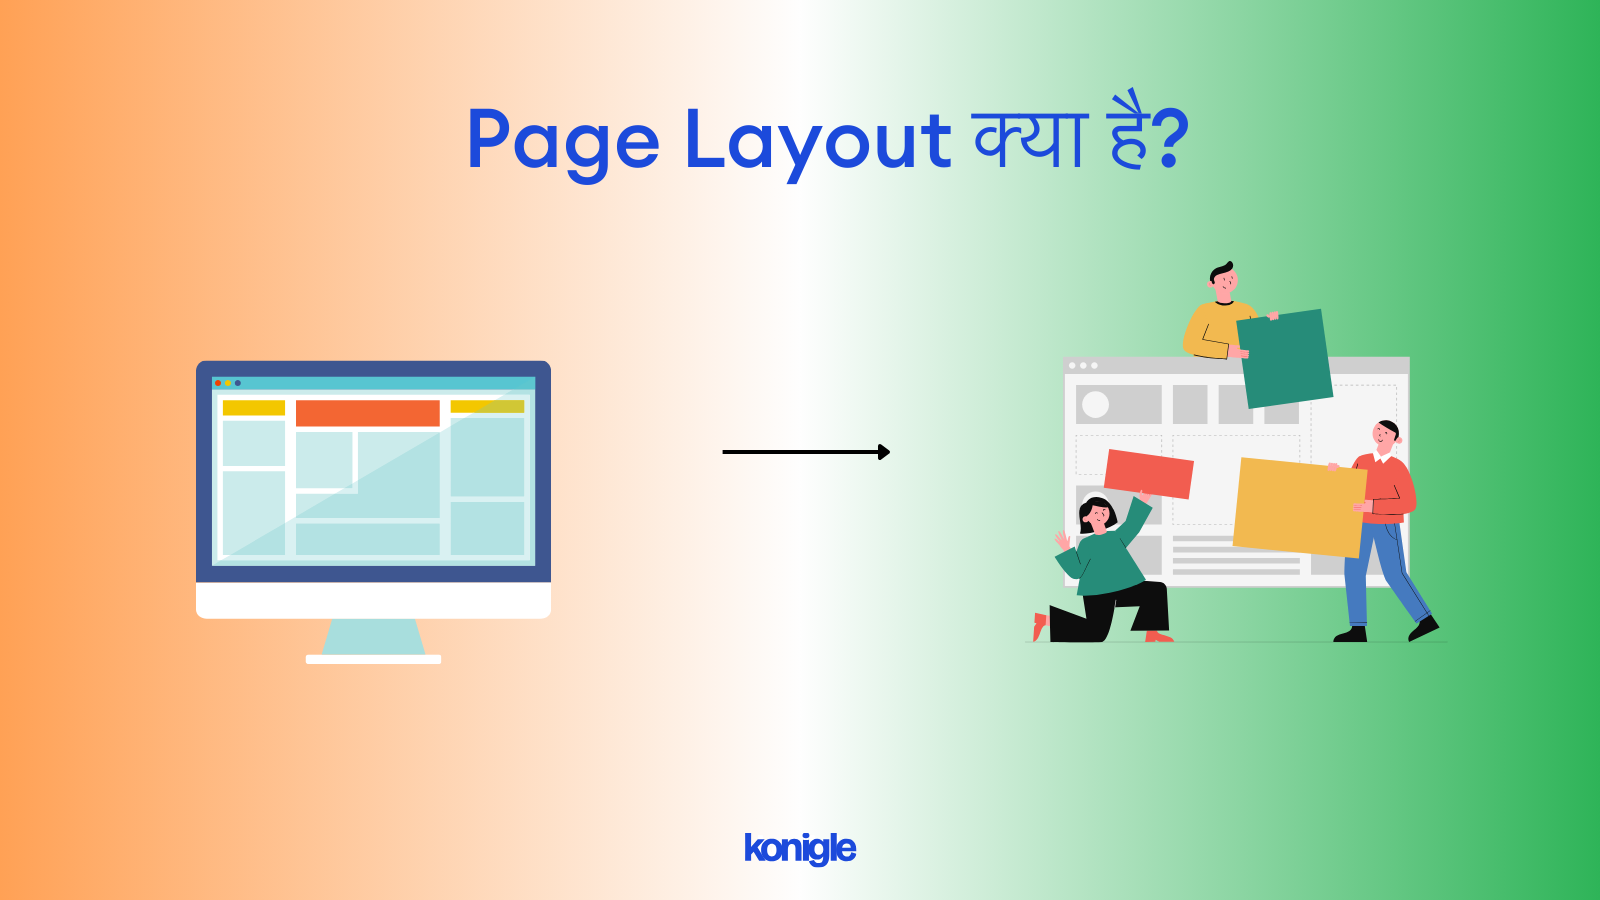 Page Layout क्या है - What is Page Layout in Hindi